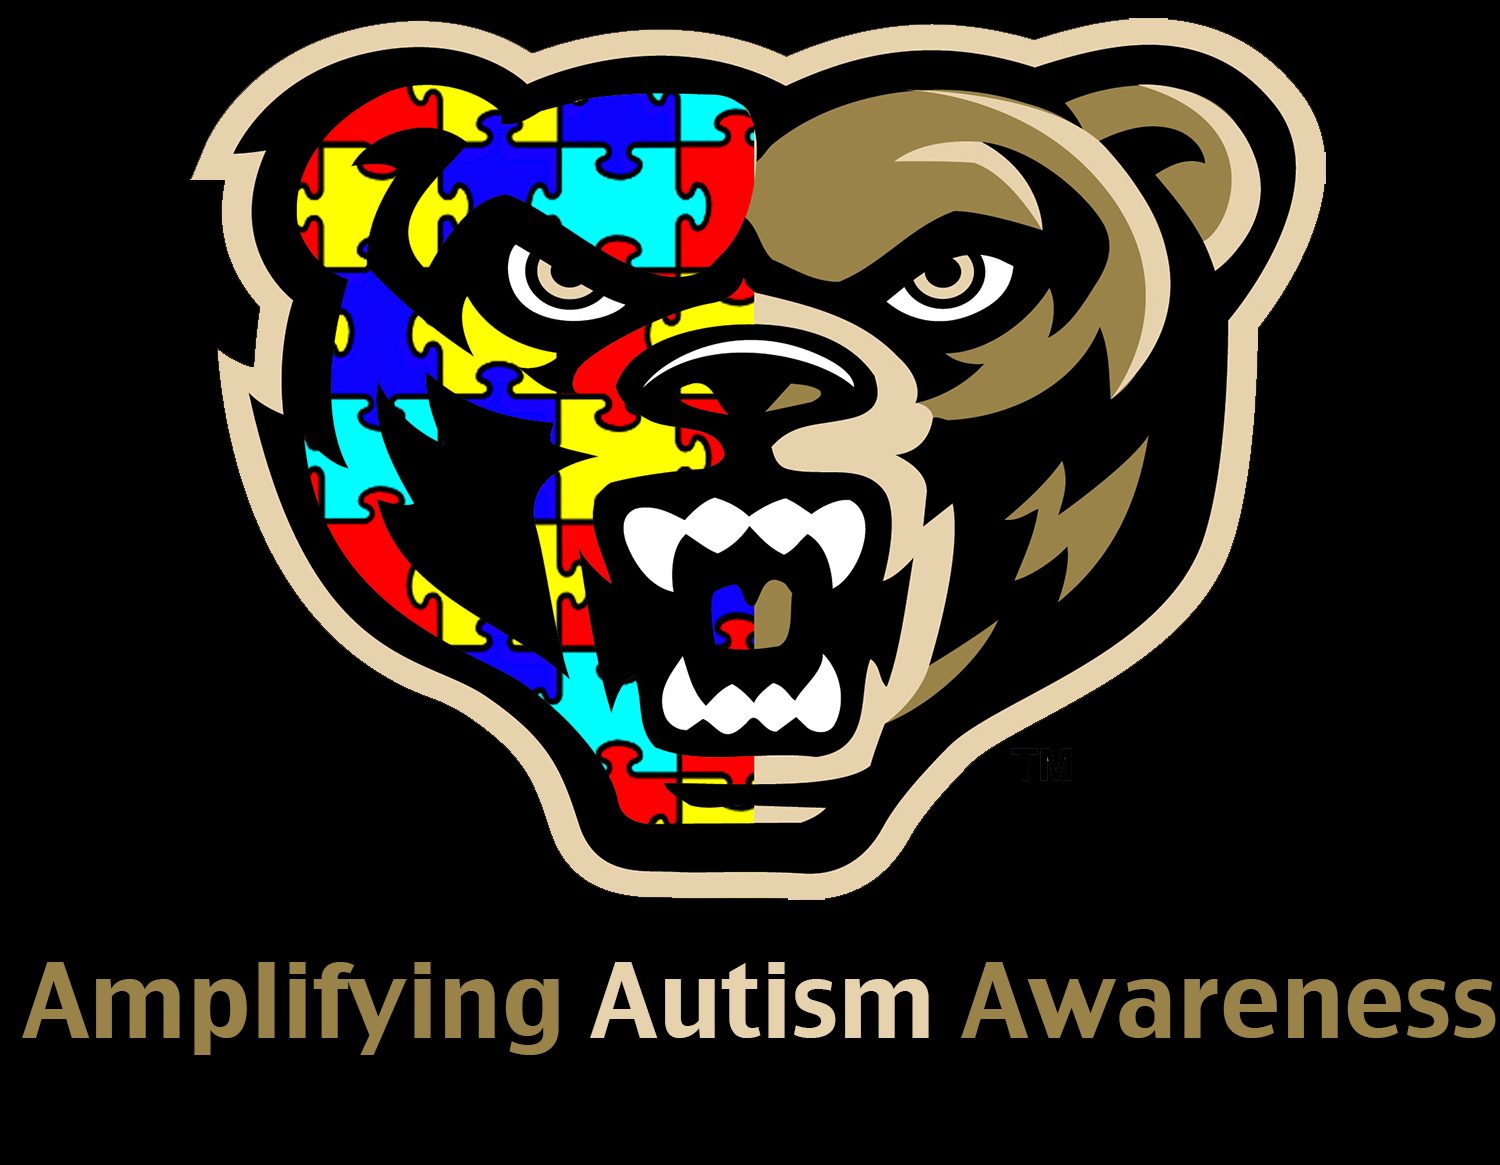 Amplifying Autism Awareness is an organization at OU with a mission to spread awareness among the community.